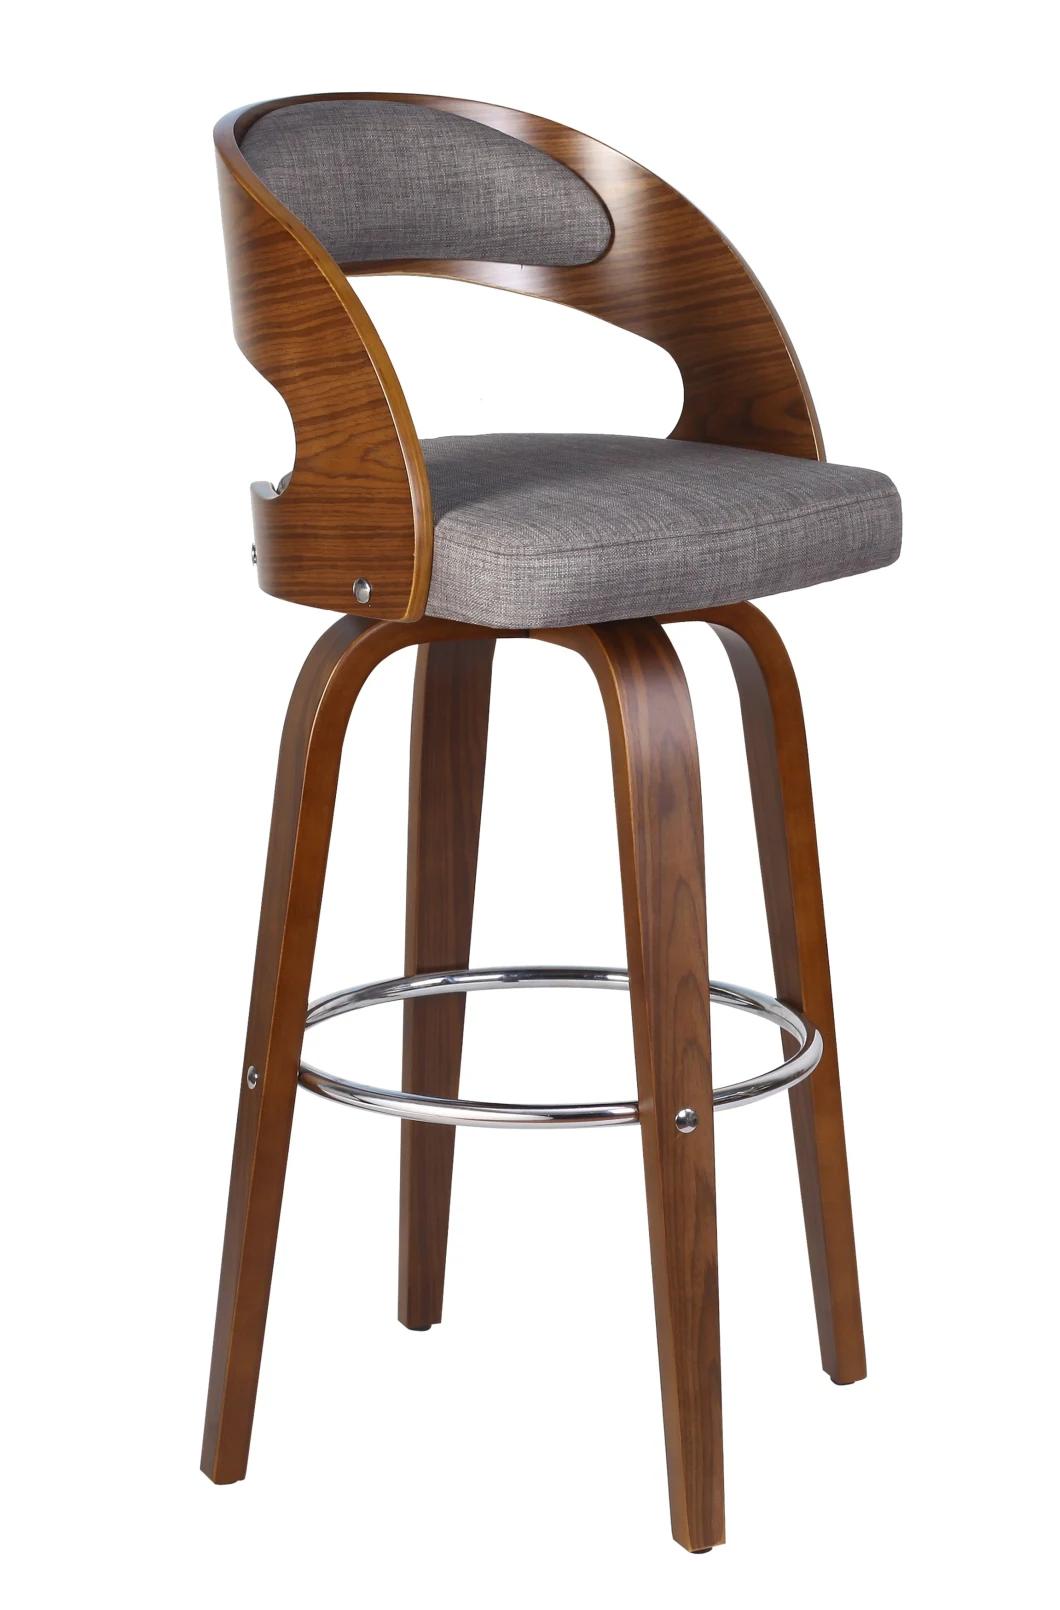 Wood Frame Plywood Seat Home Bar Furniture Counter Stool Modern High Chair